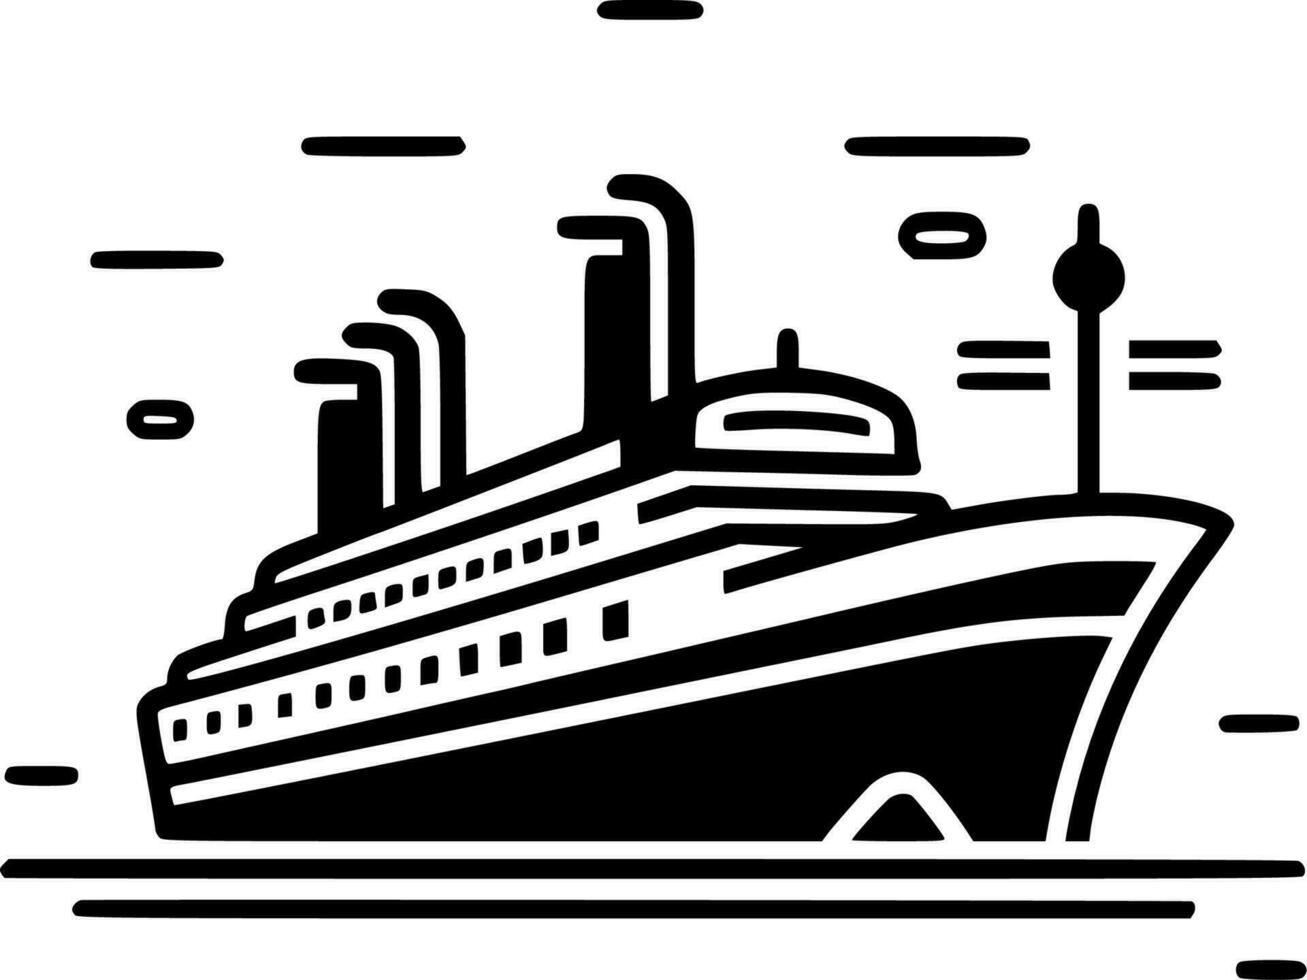 Cruise, Black and White Vector illustration